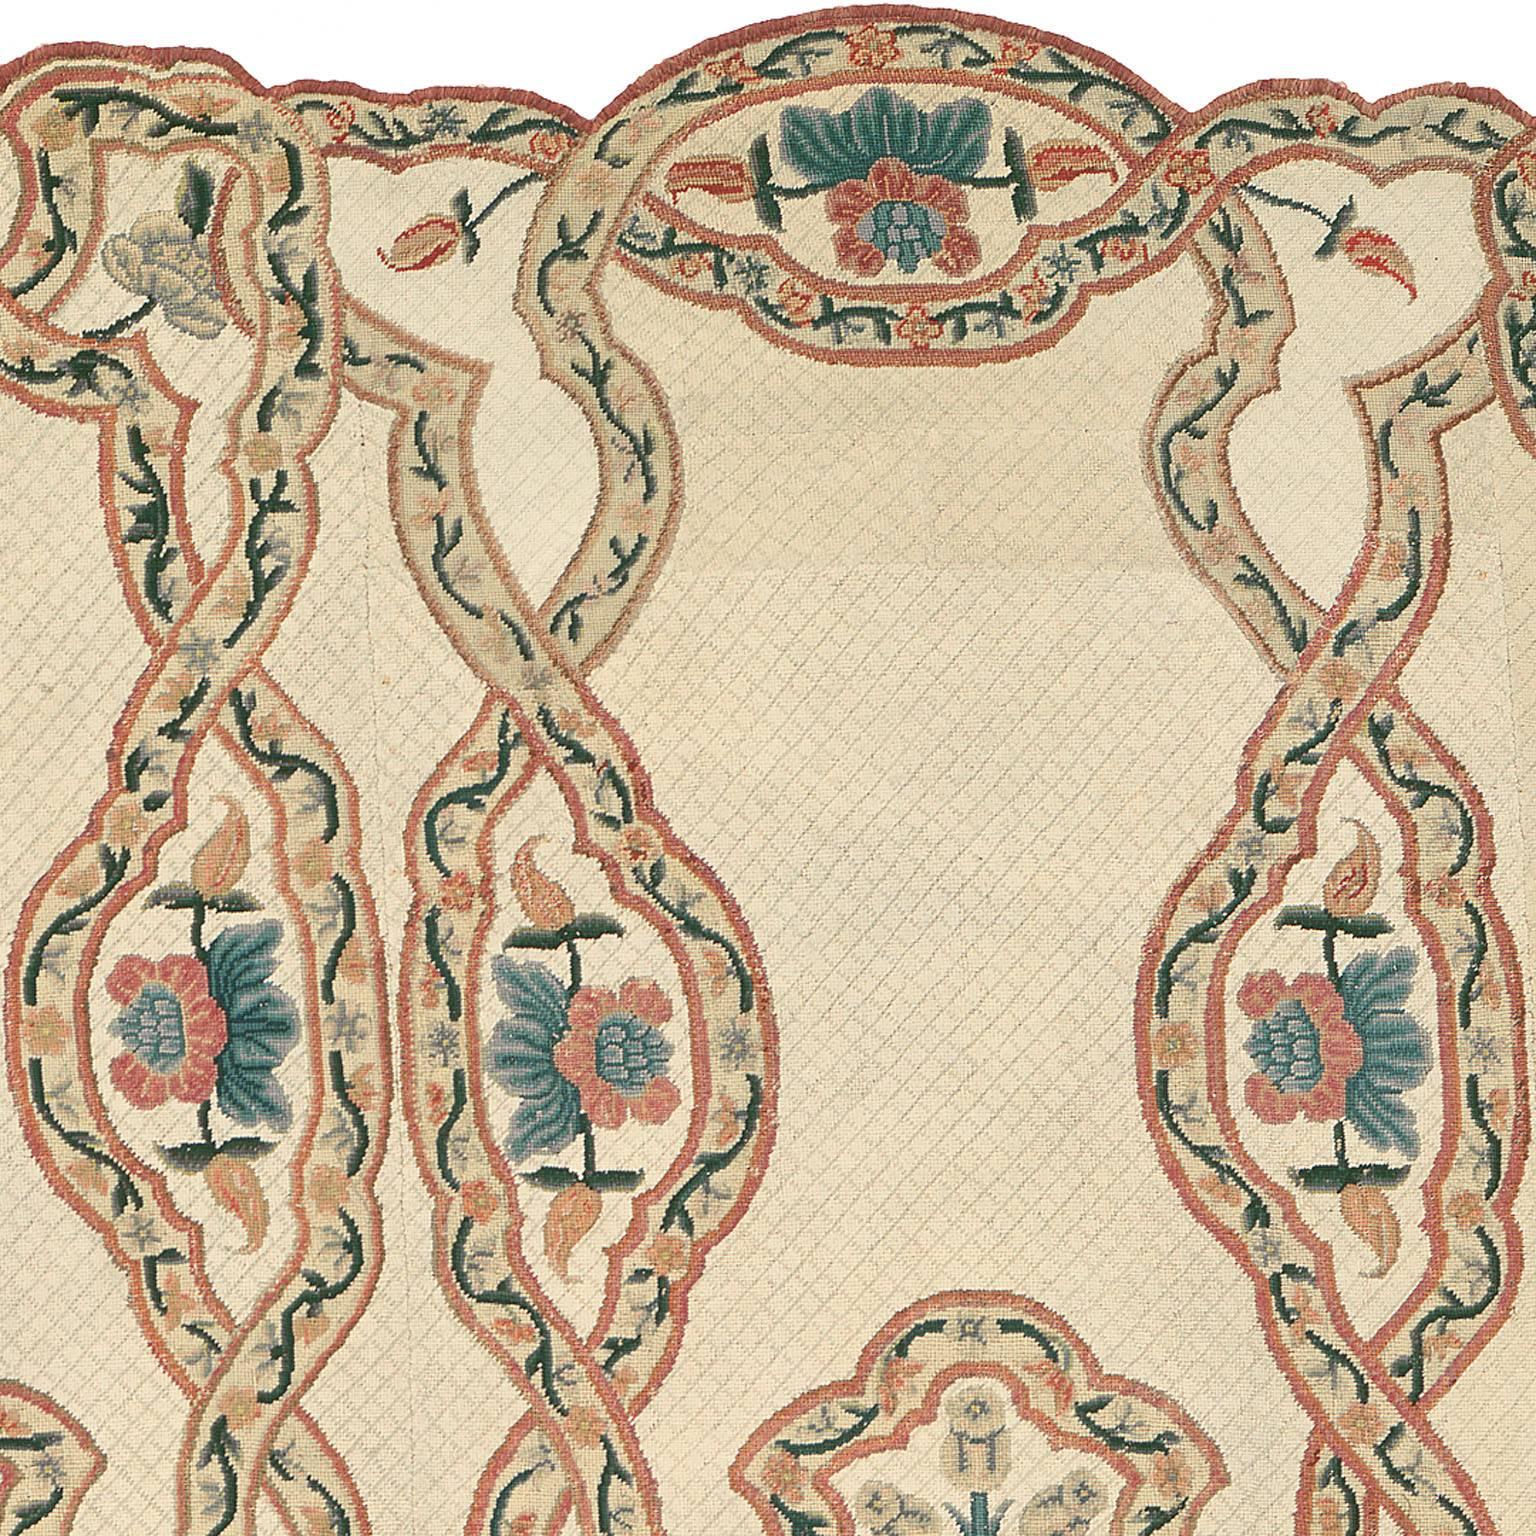 Late 18th Century French Embroidery Carpet For Sale 1